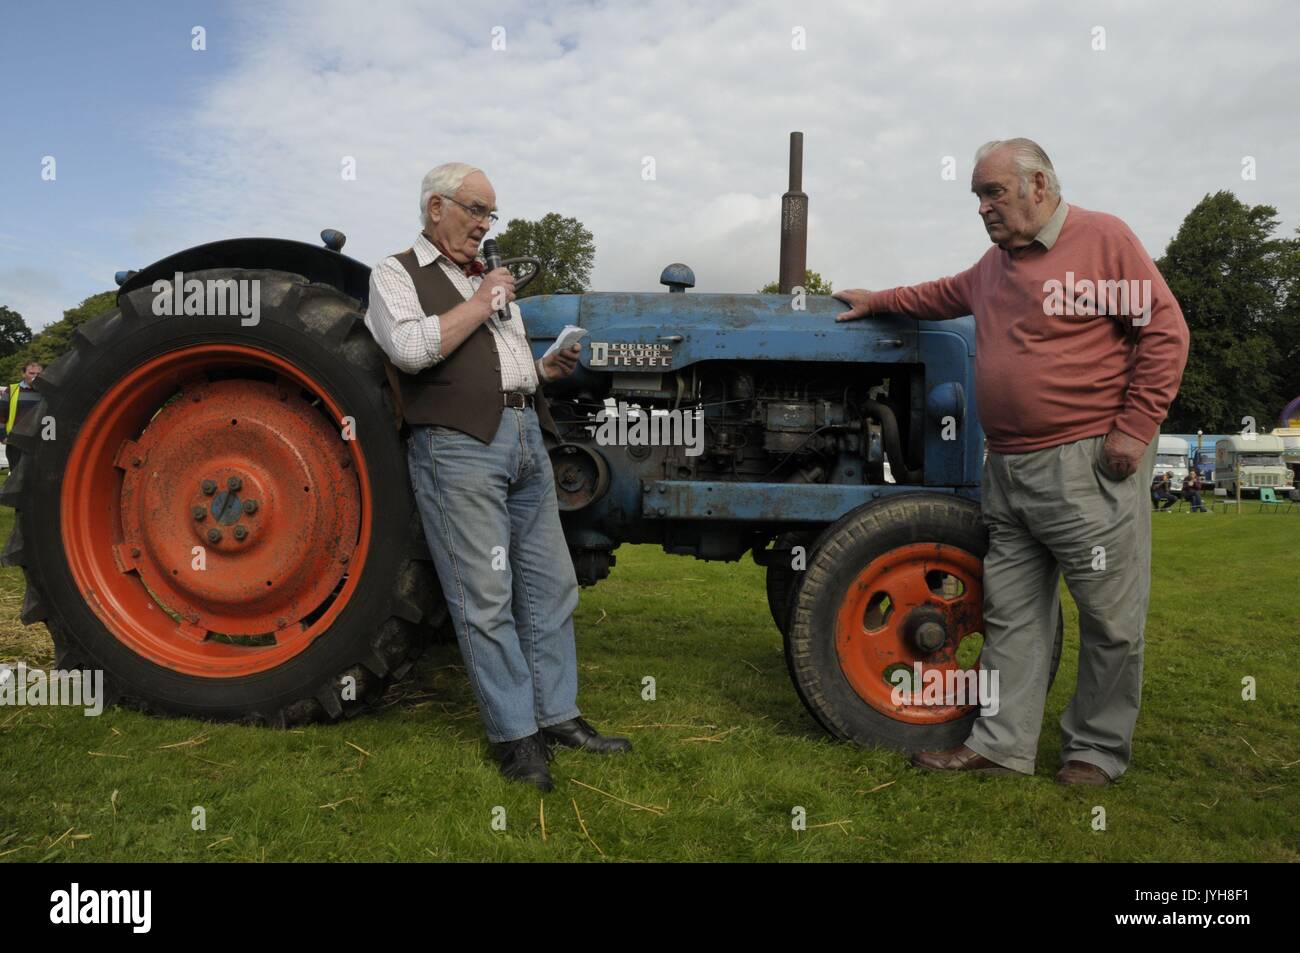 Kington, , UK. 20th Aug, 2017. The Herefordshire market town of Kington came to a standstill while a parade of vintage vehicles made their way to the Kington Vintage Club's 25th Annual Show. Kington Vintage Club members Barry Evans (left) and Alan Bayliss officialy open the show. Credit: Andrew Compton/Alamy Live News Stock Photo